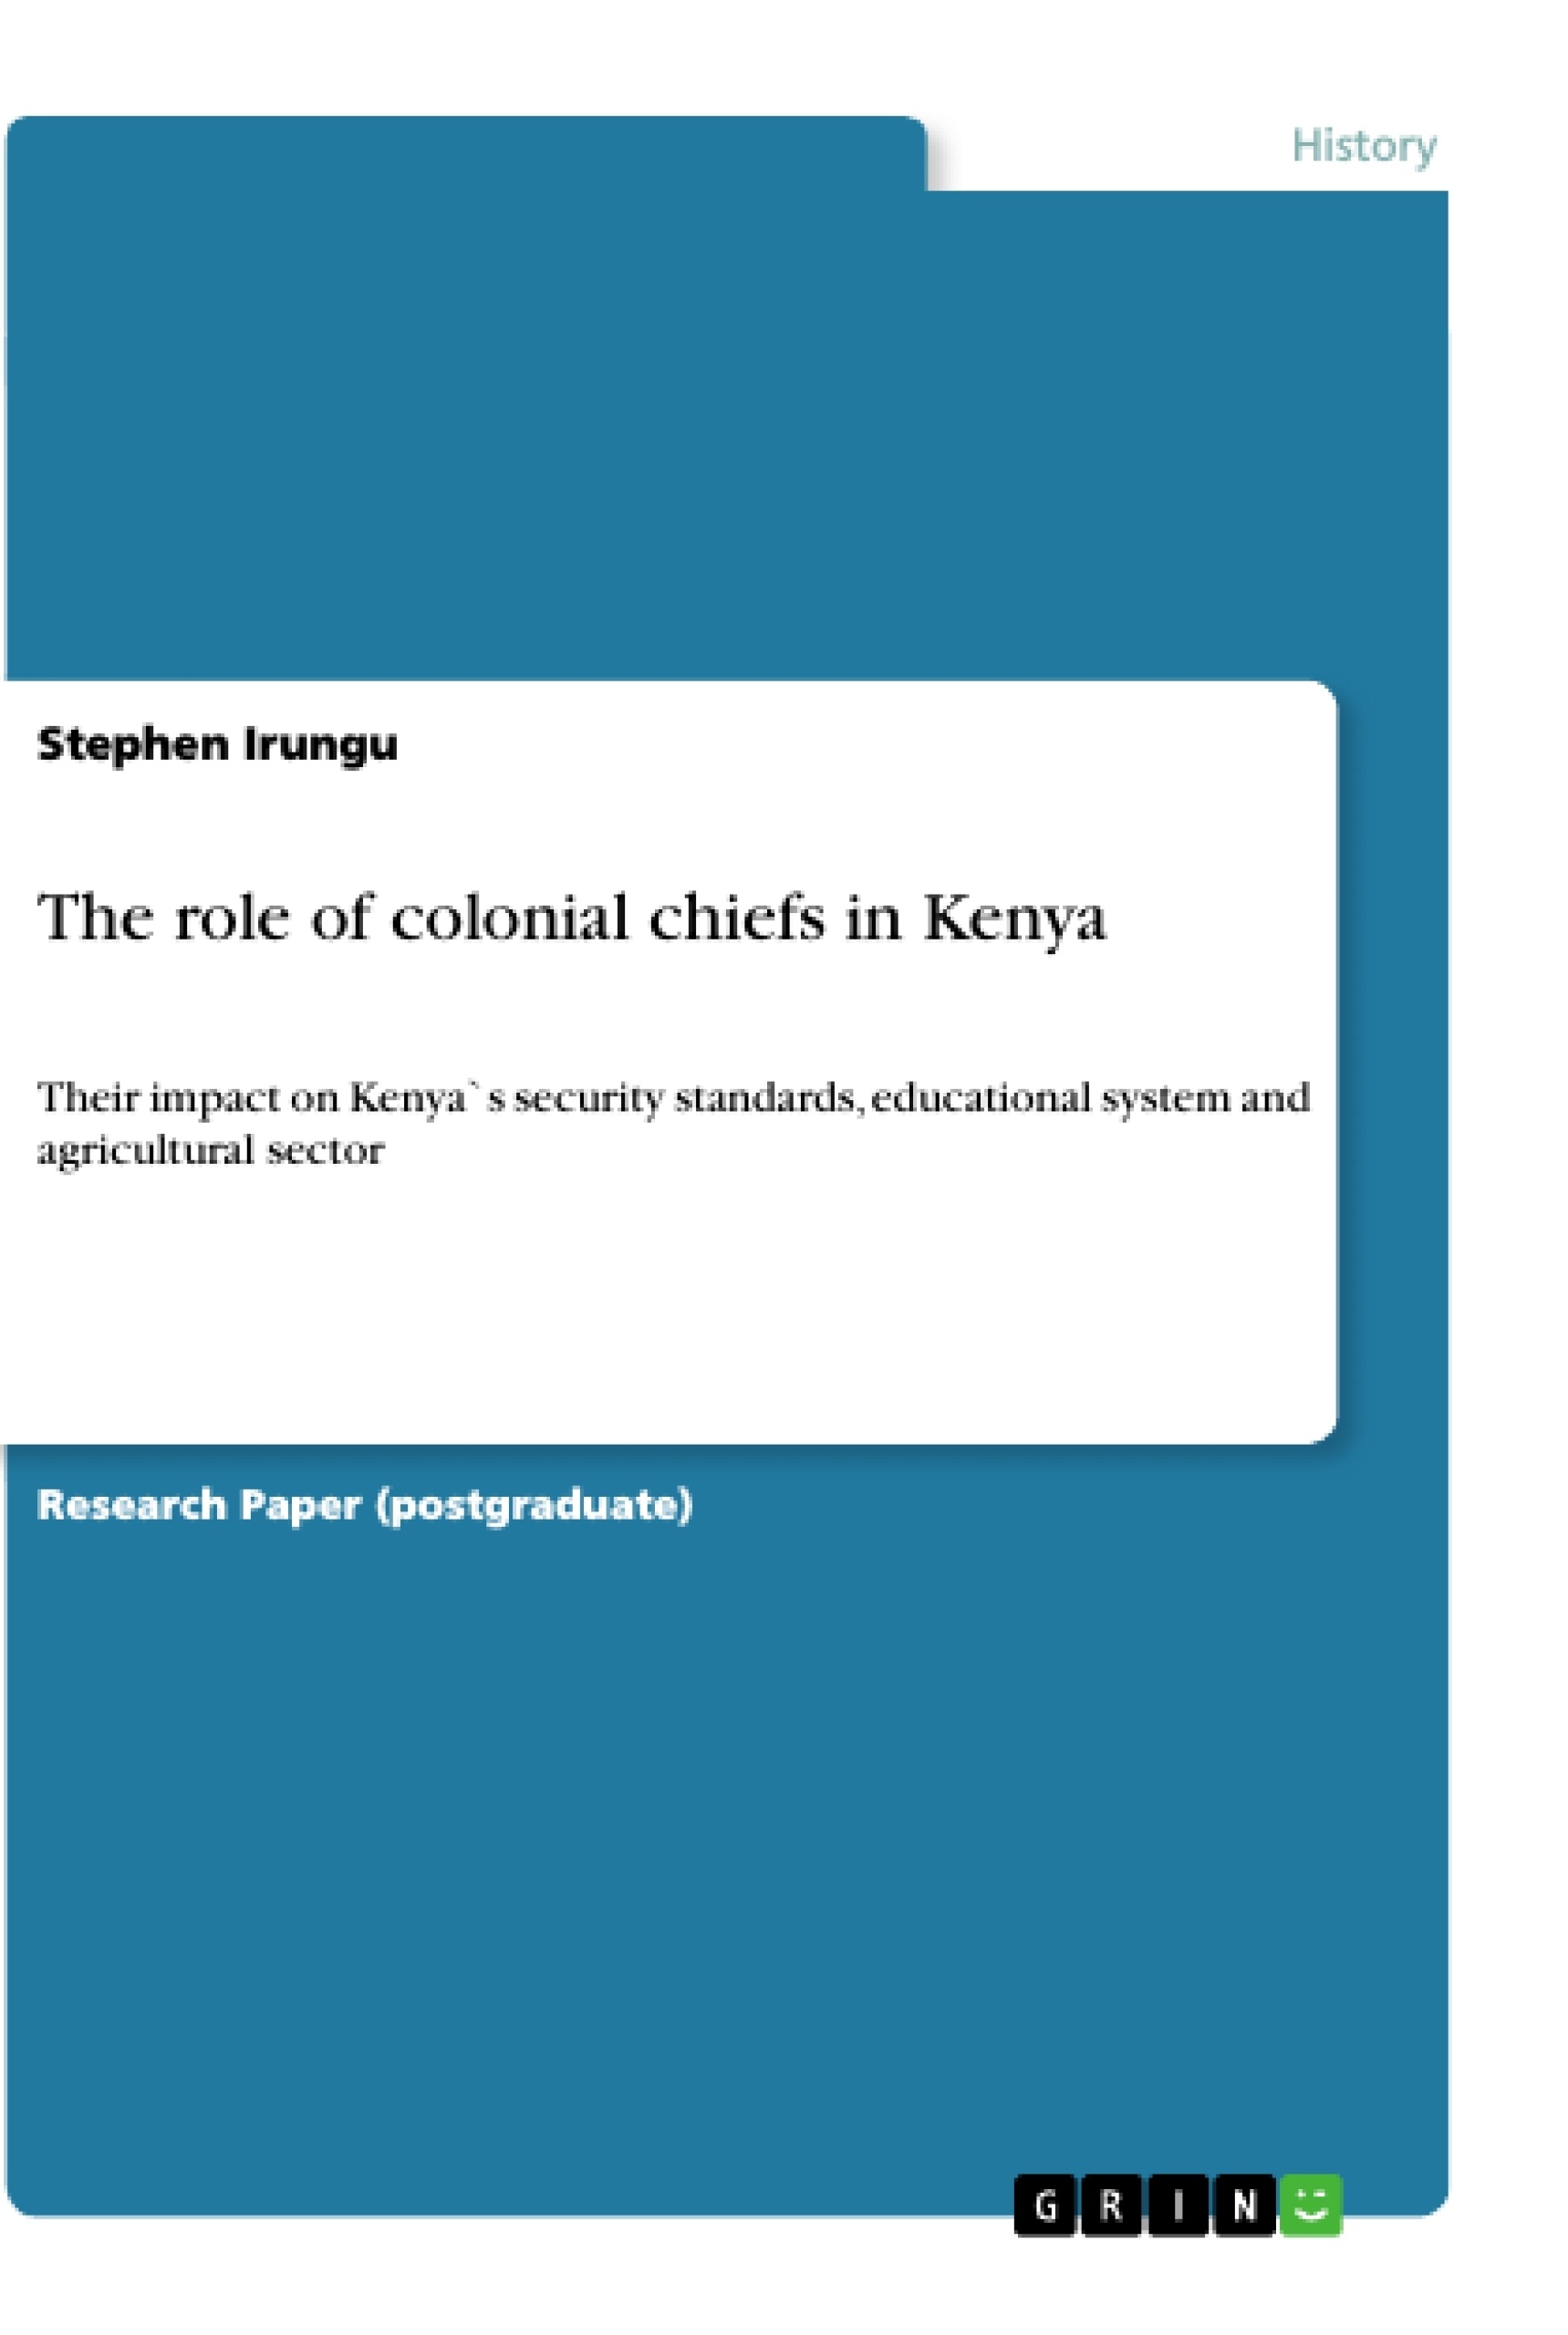 Título: The role of colonial chiefs in Kenya